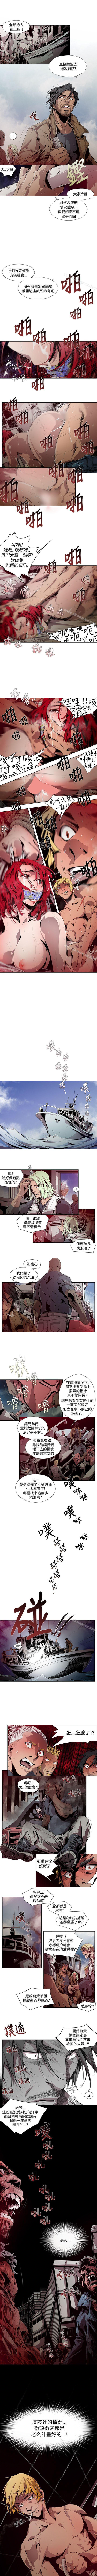 Farting 陰濕路 1-41 Blackmail - Page 14